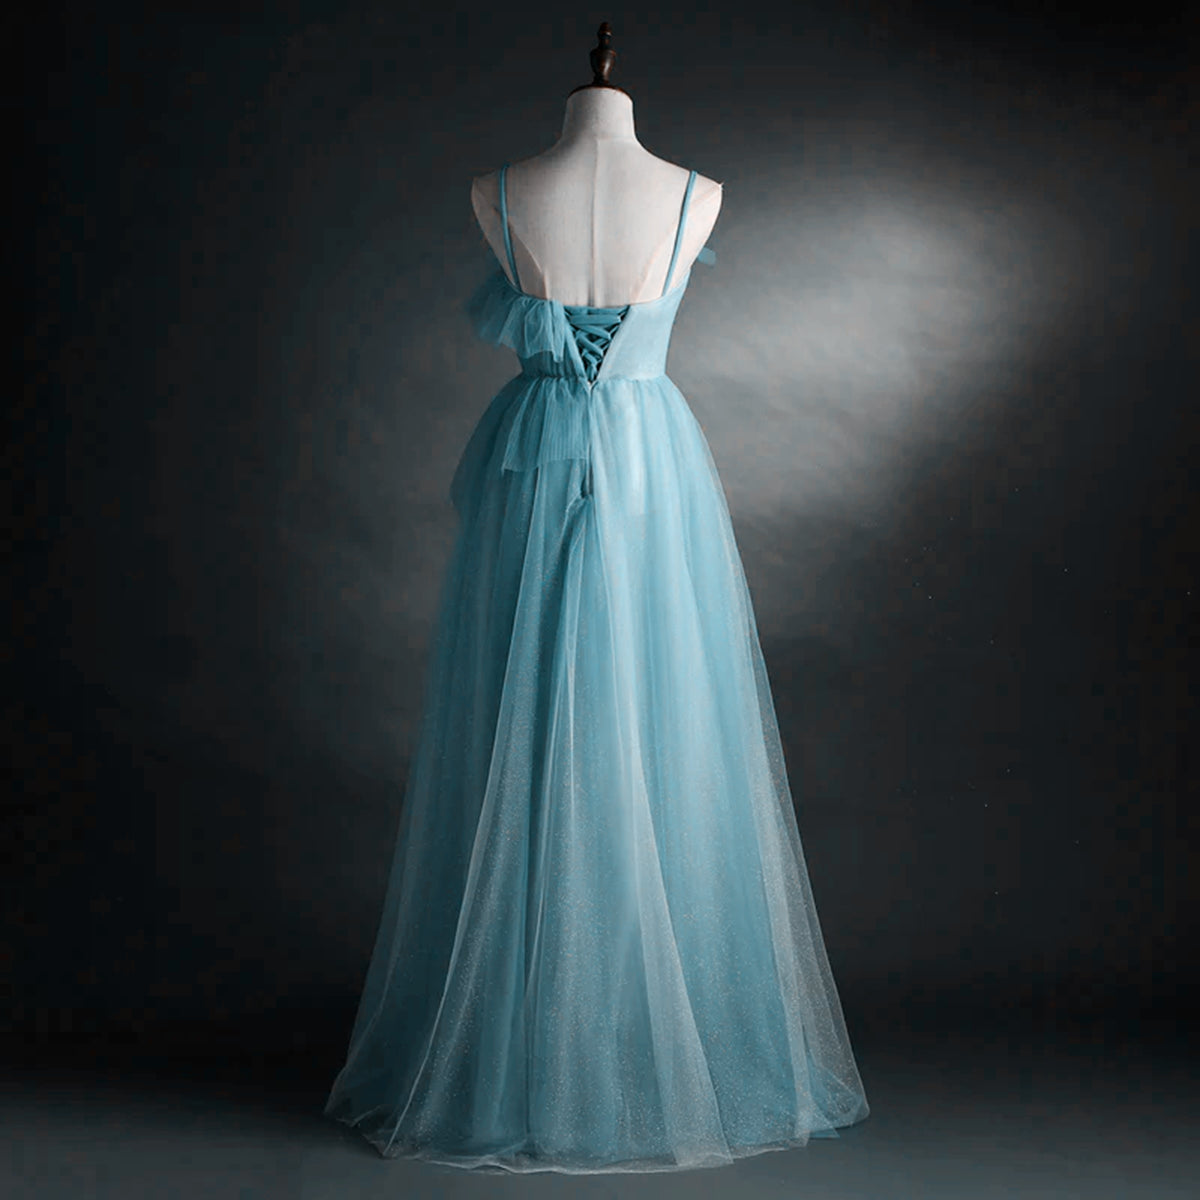 Prom Dress Ballgown, A-line Blue Tulle Straps Long Formal Dress, Blue Long Evening Dress Prom Dress